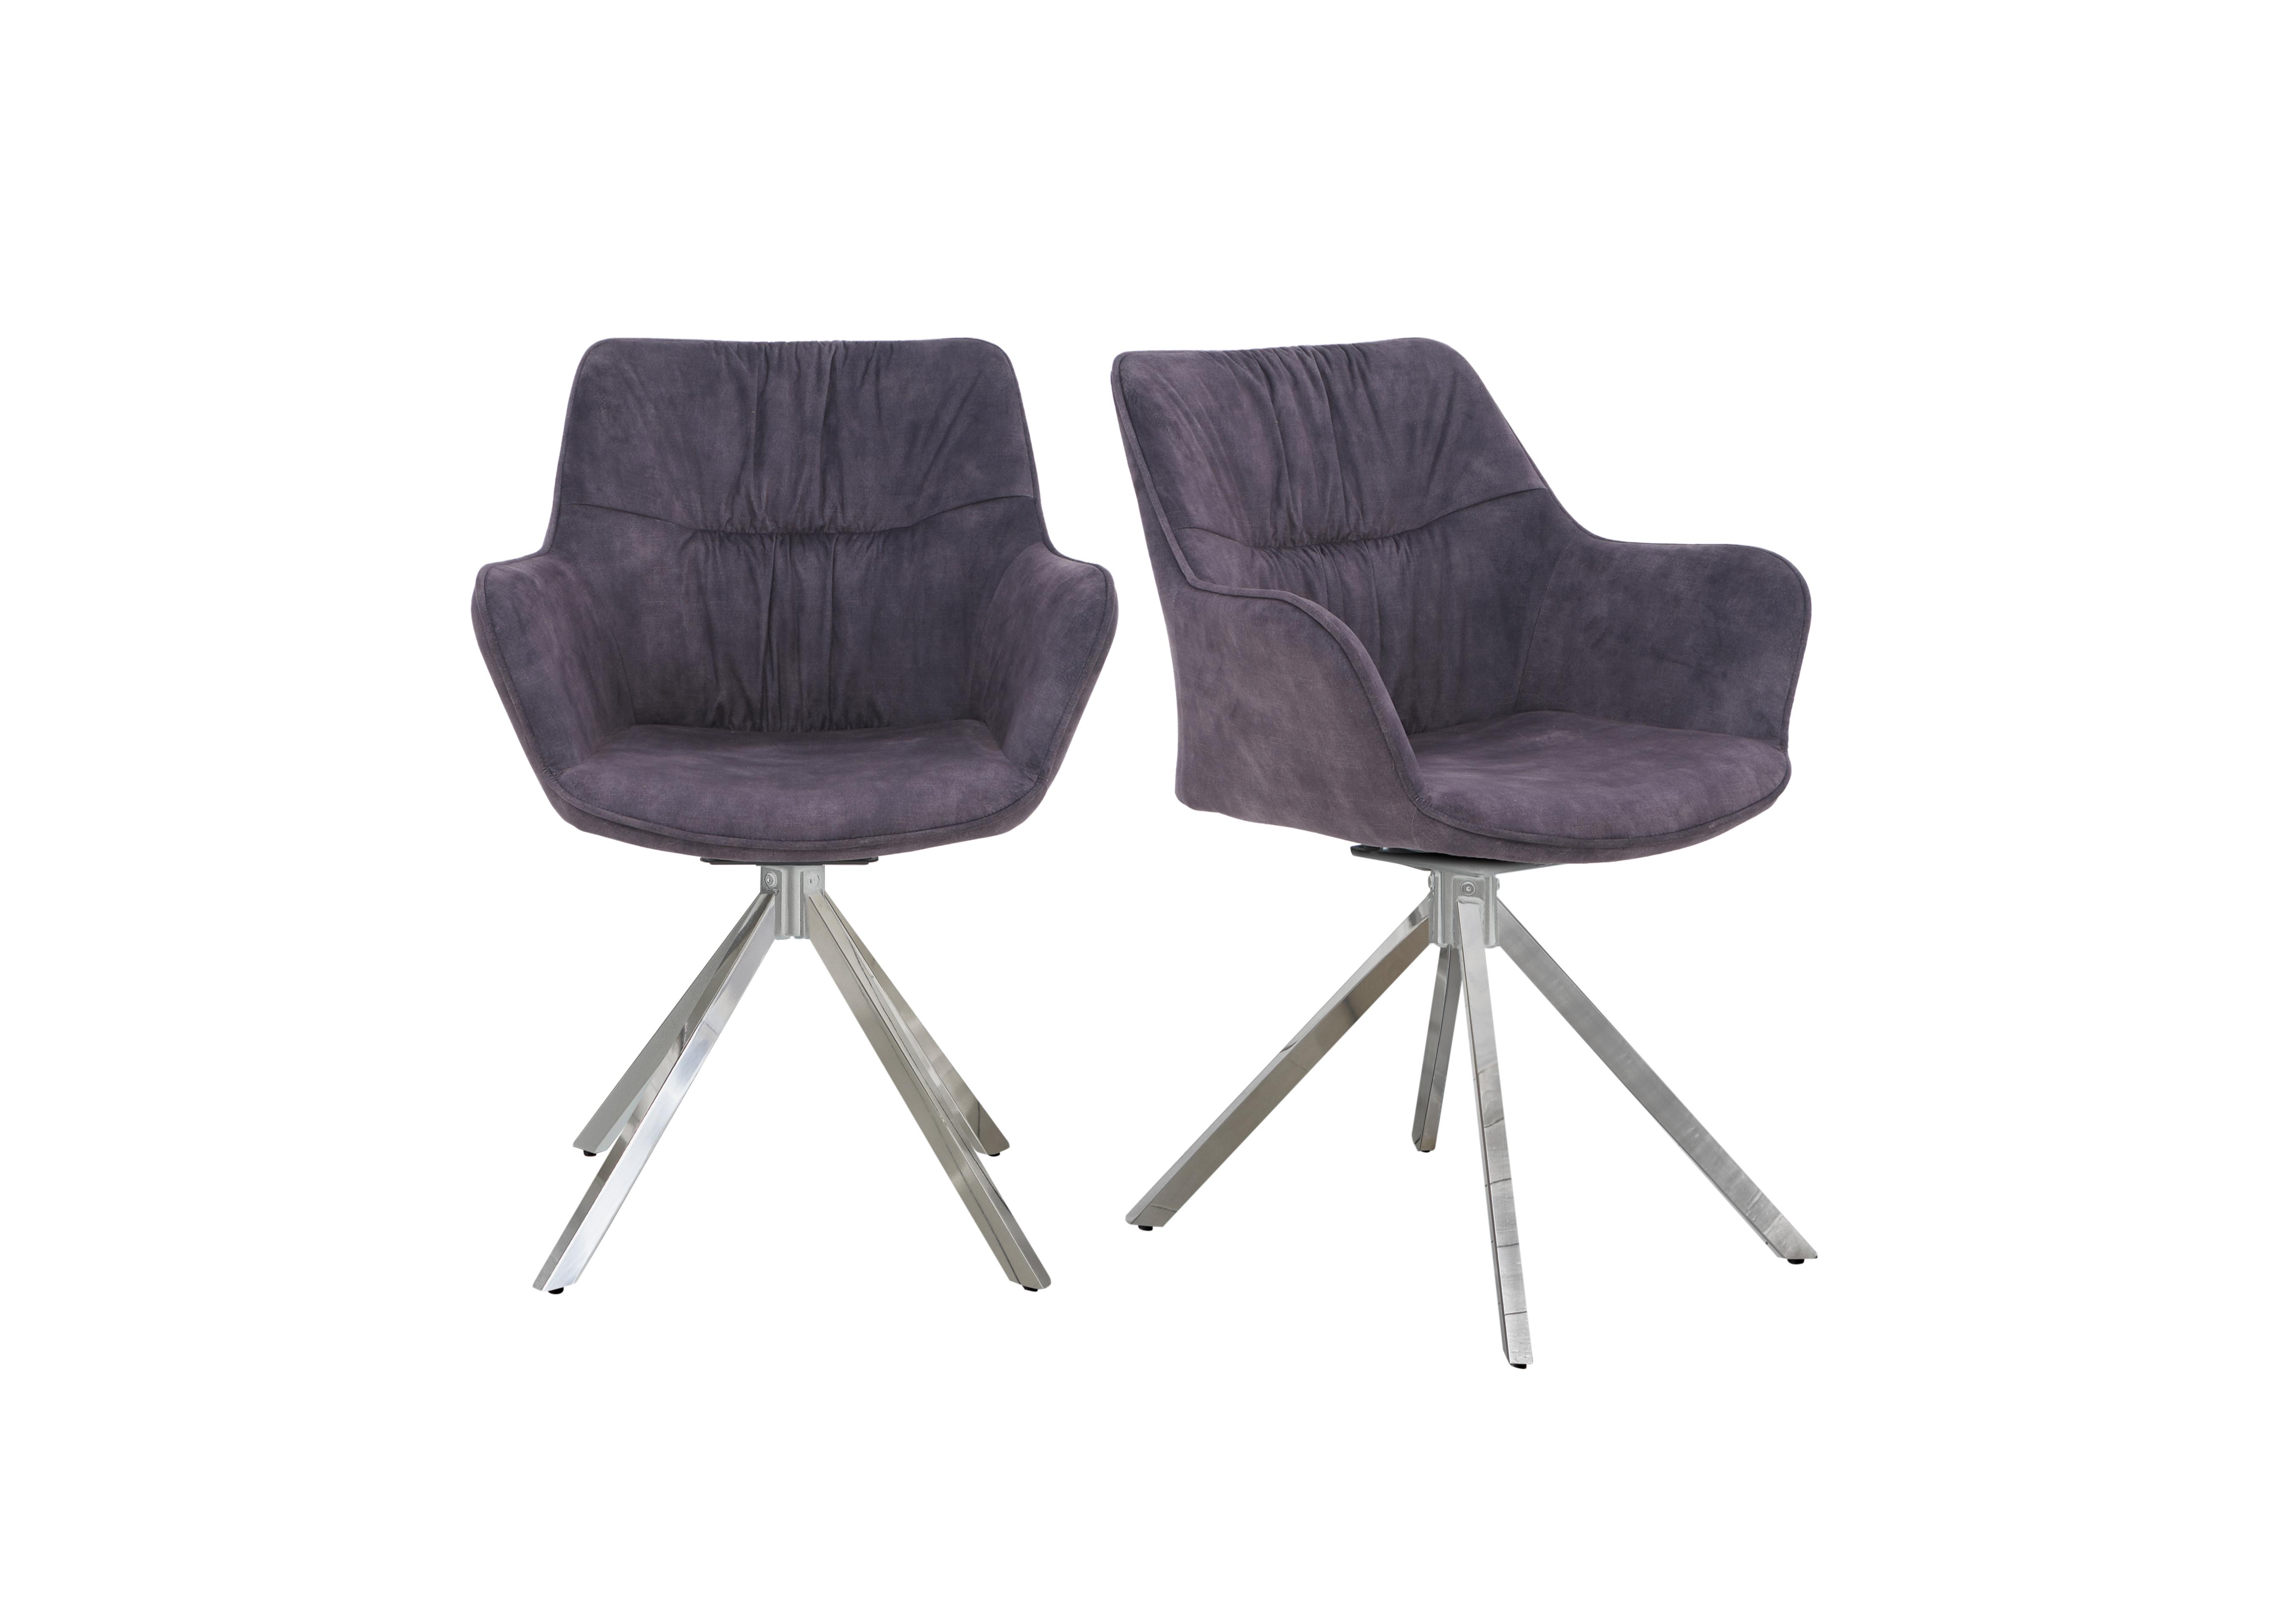 Marvel Chrome Pair of Swivel Dining Chairs in Charcoal on Furniture Village